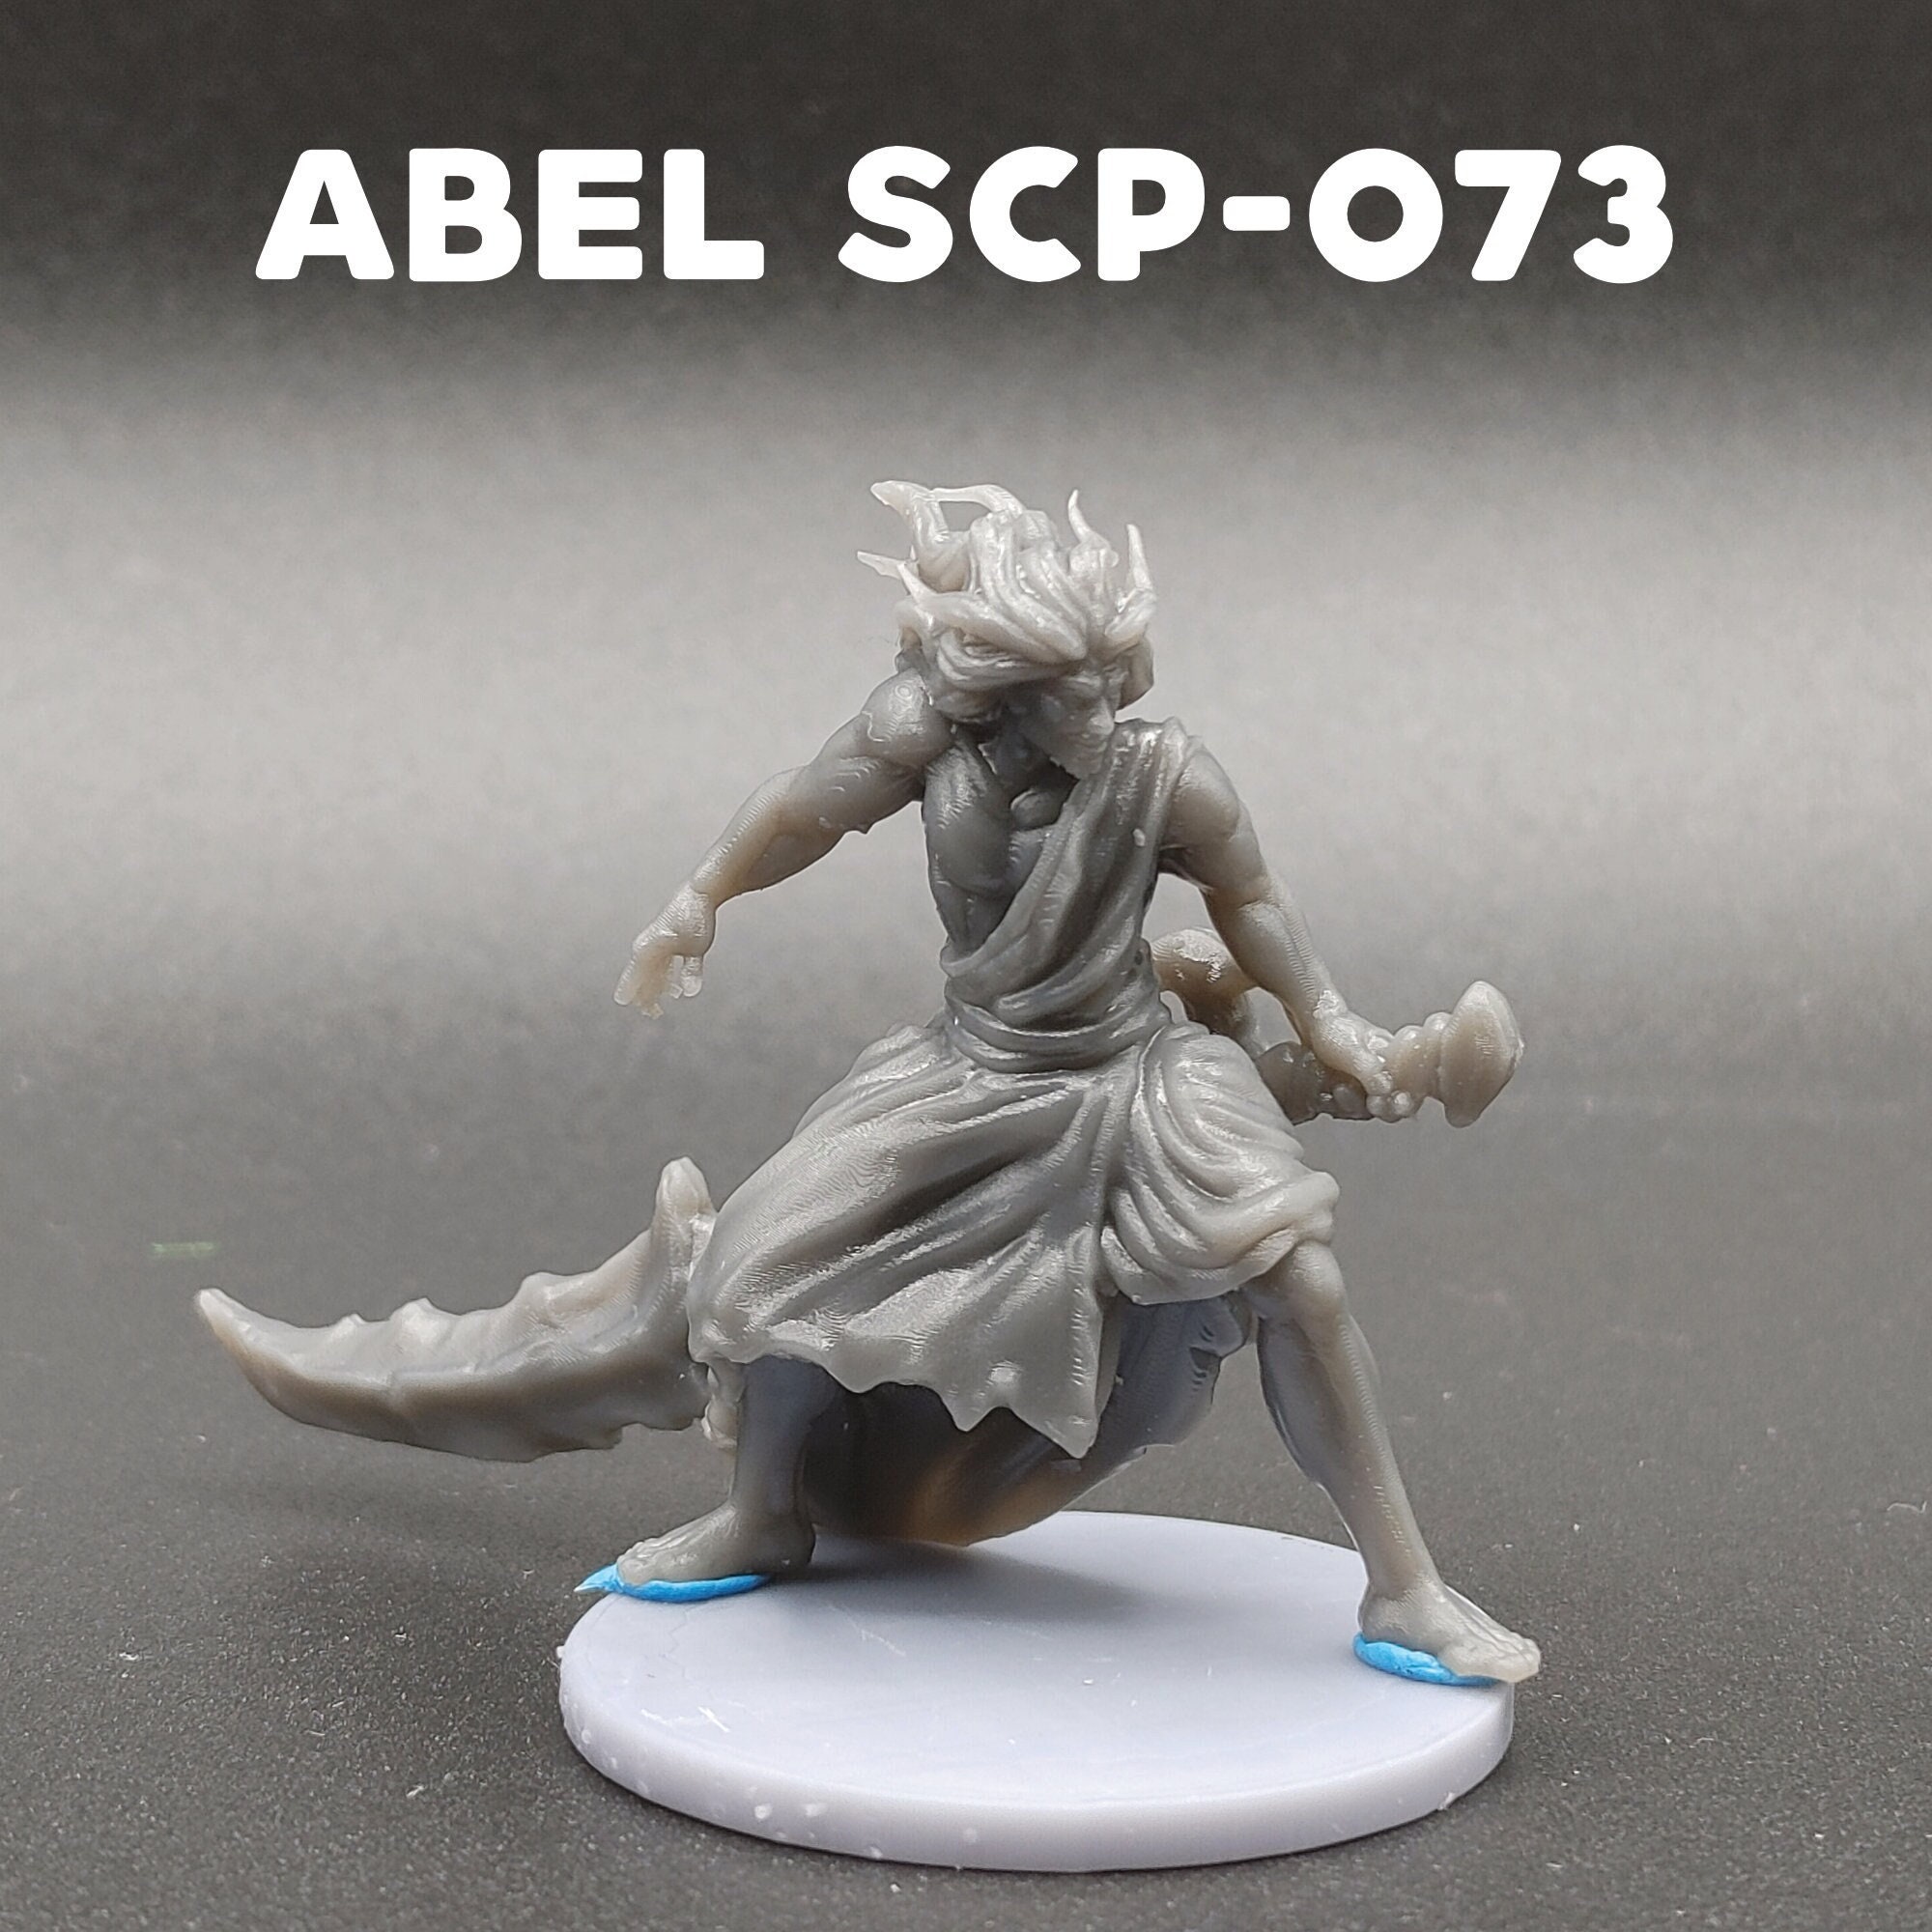 SCP-076 (Able) Sticker for Sale by SCPillustrated